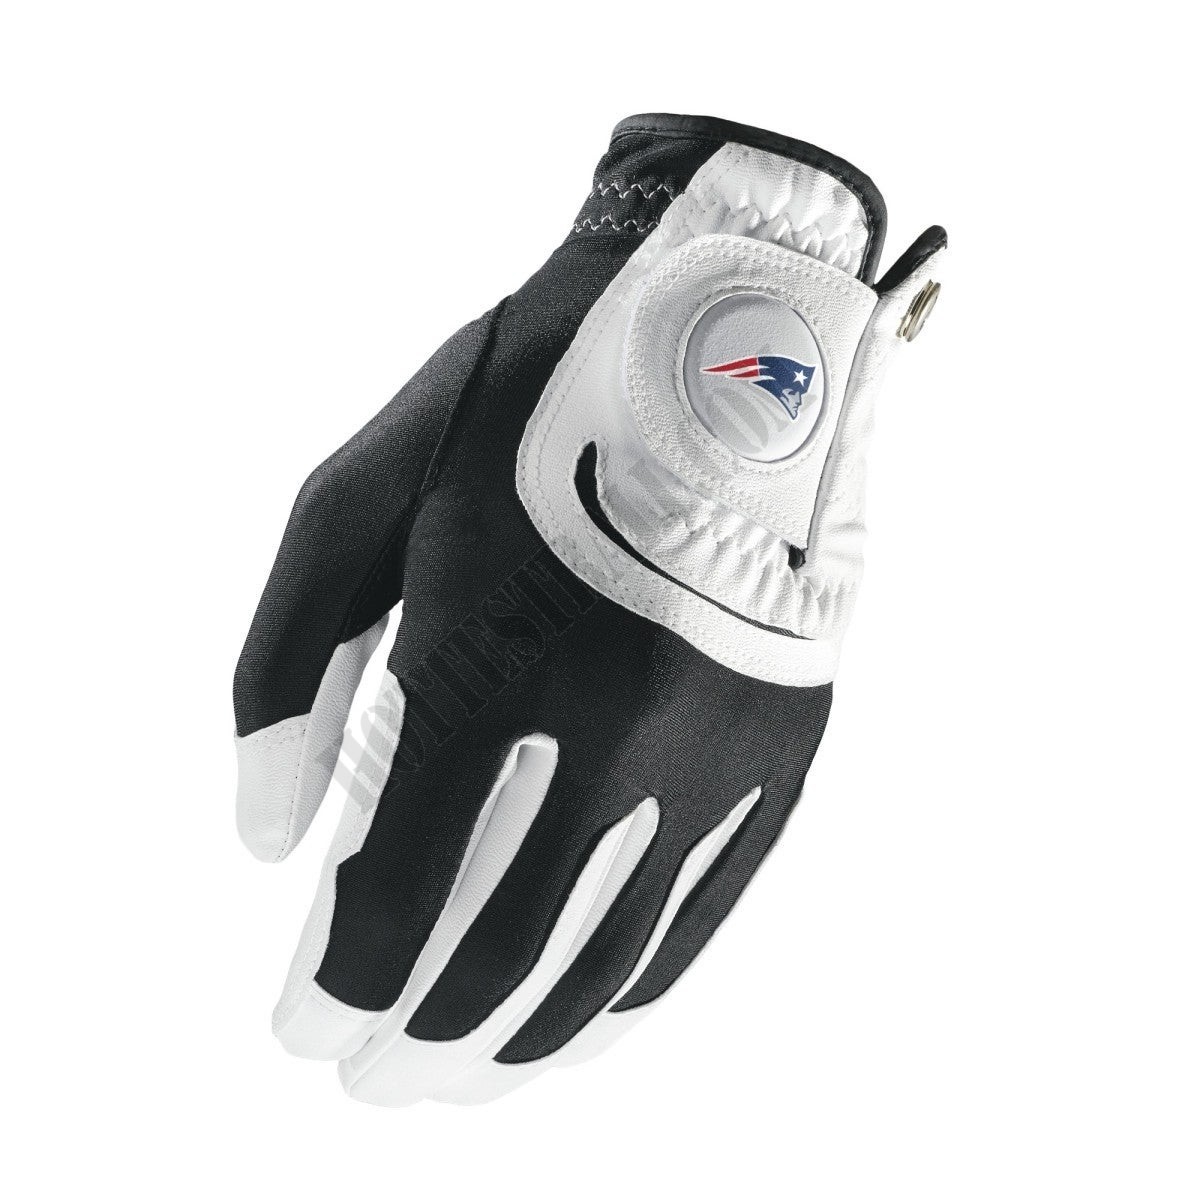 Wilson Staff Fit All NFL Glove ● Wilson Promotions - -0